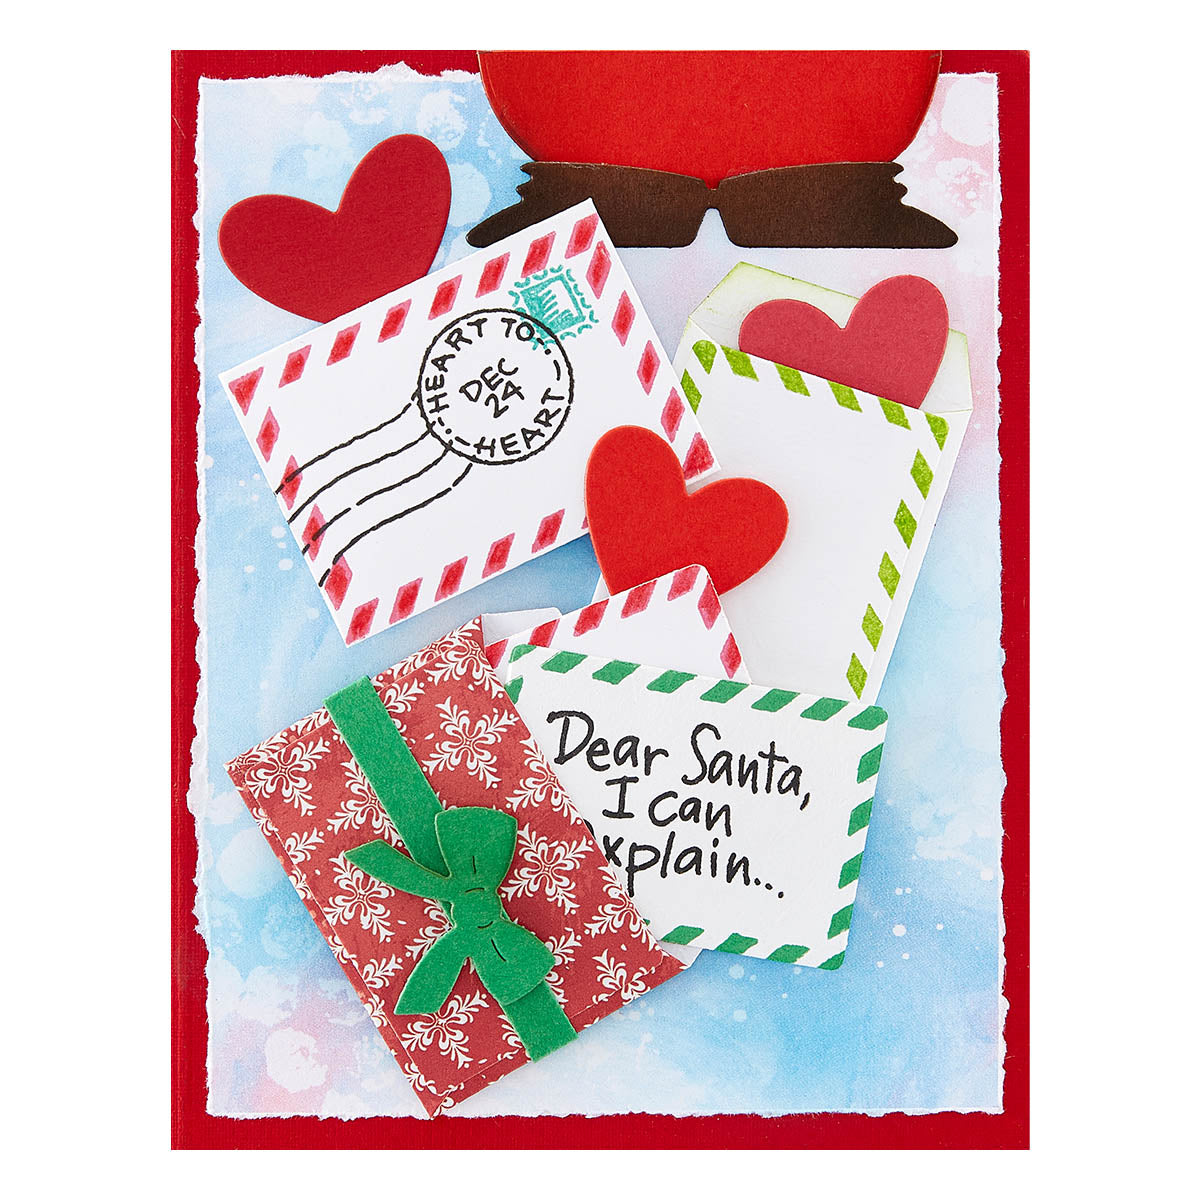 Spellbinders Holiday Hugs Sentiments Clear Stamp Set from the Holiday Hugs Collection by Stampendous